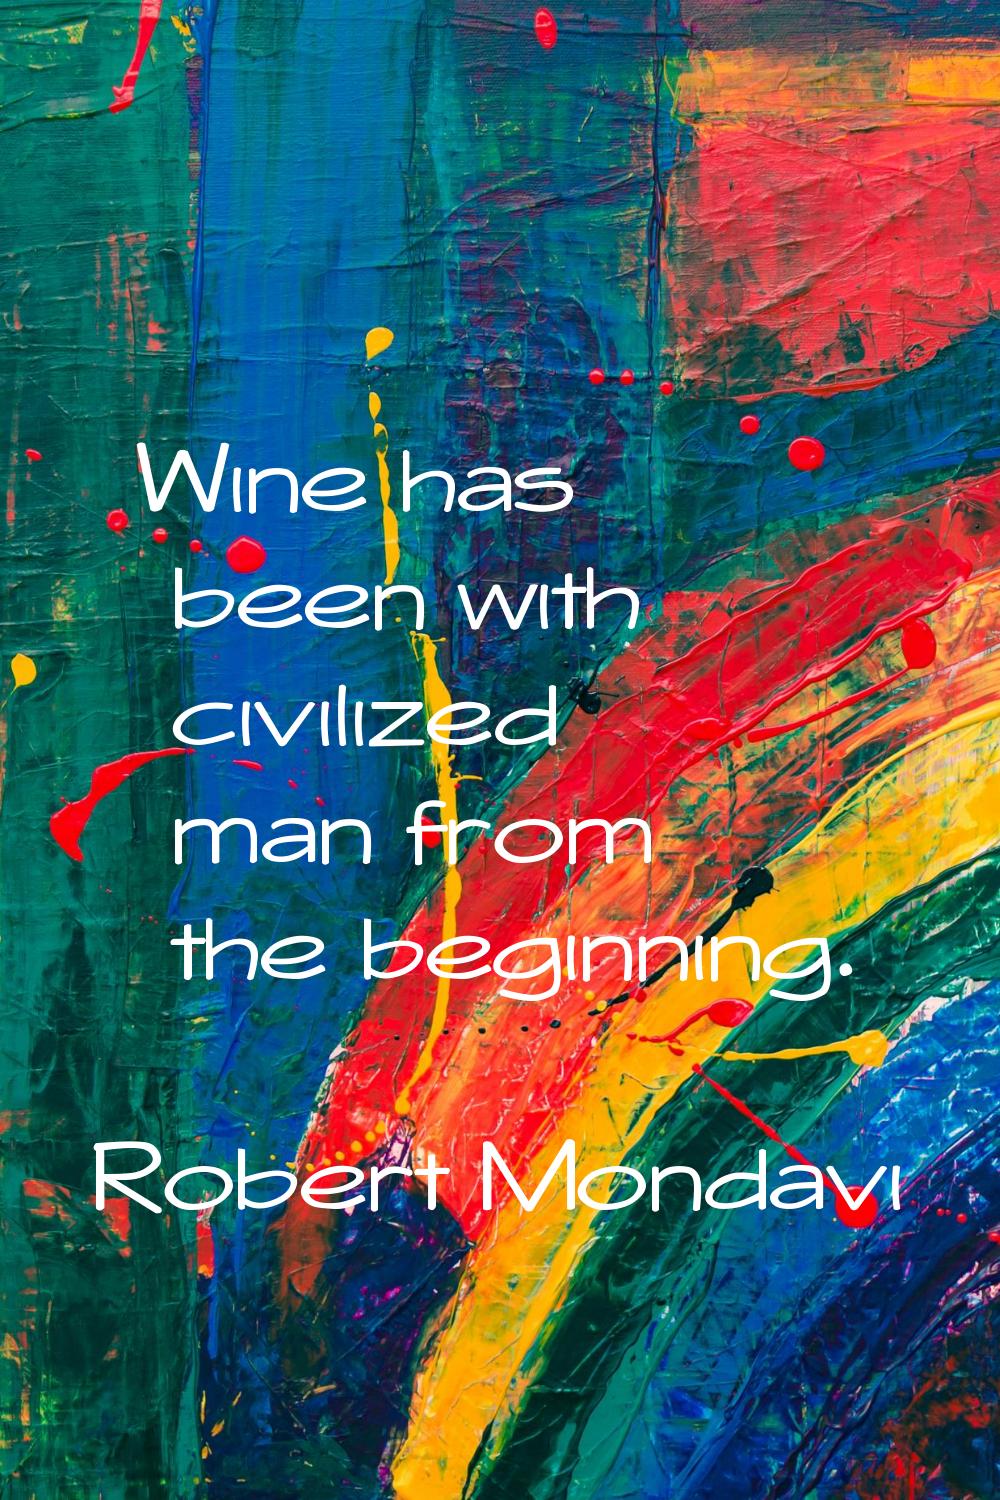 Wine has been with civilized man from the beginning.